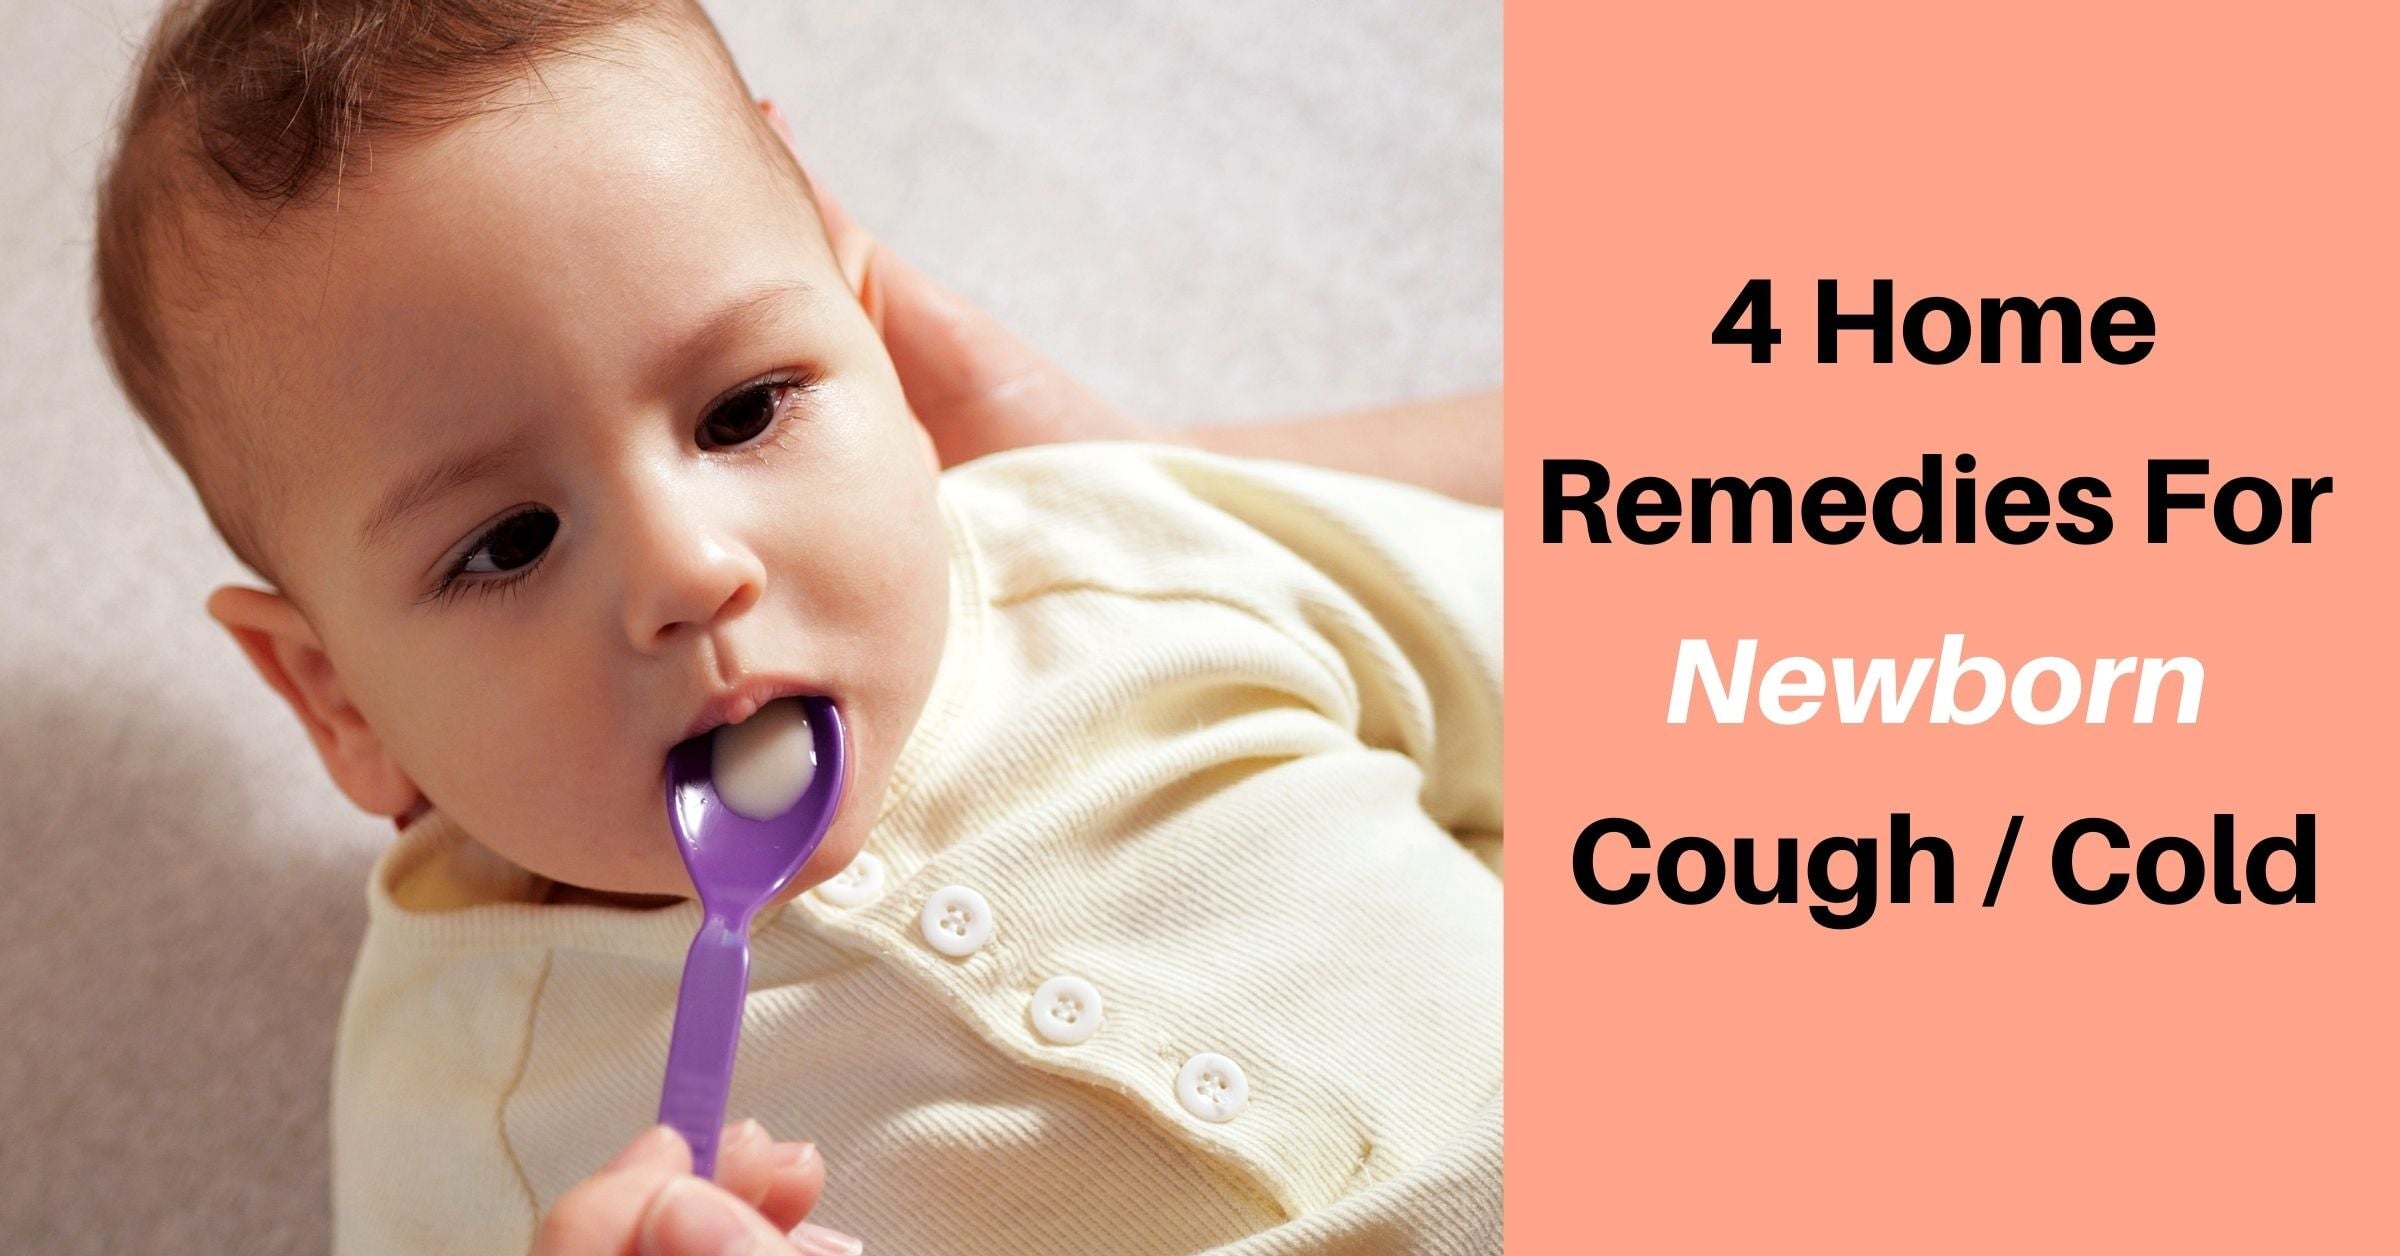 4 Home Remedies For Newborn Cough / Cold